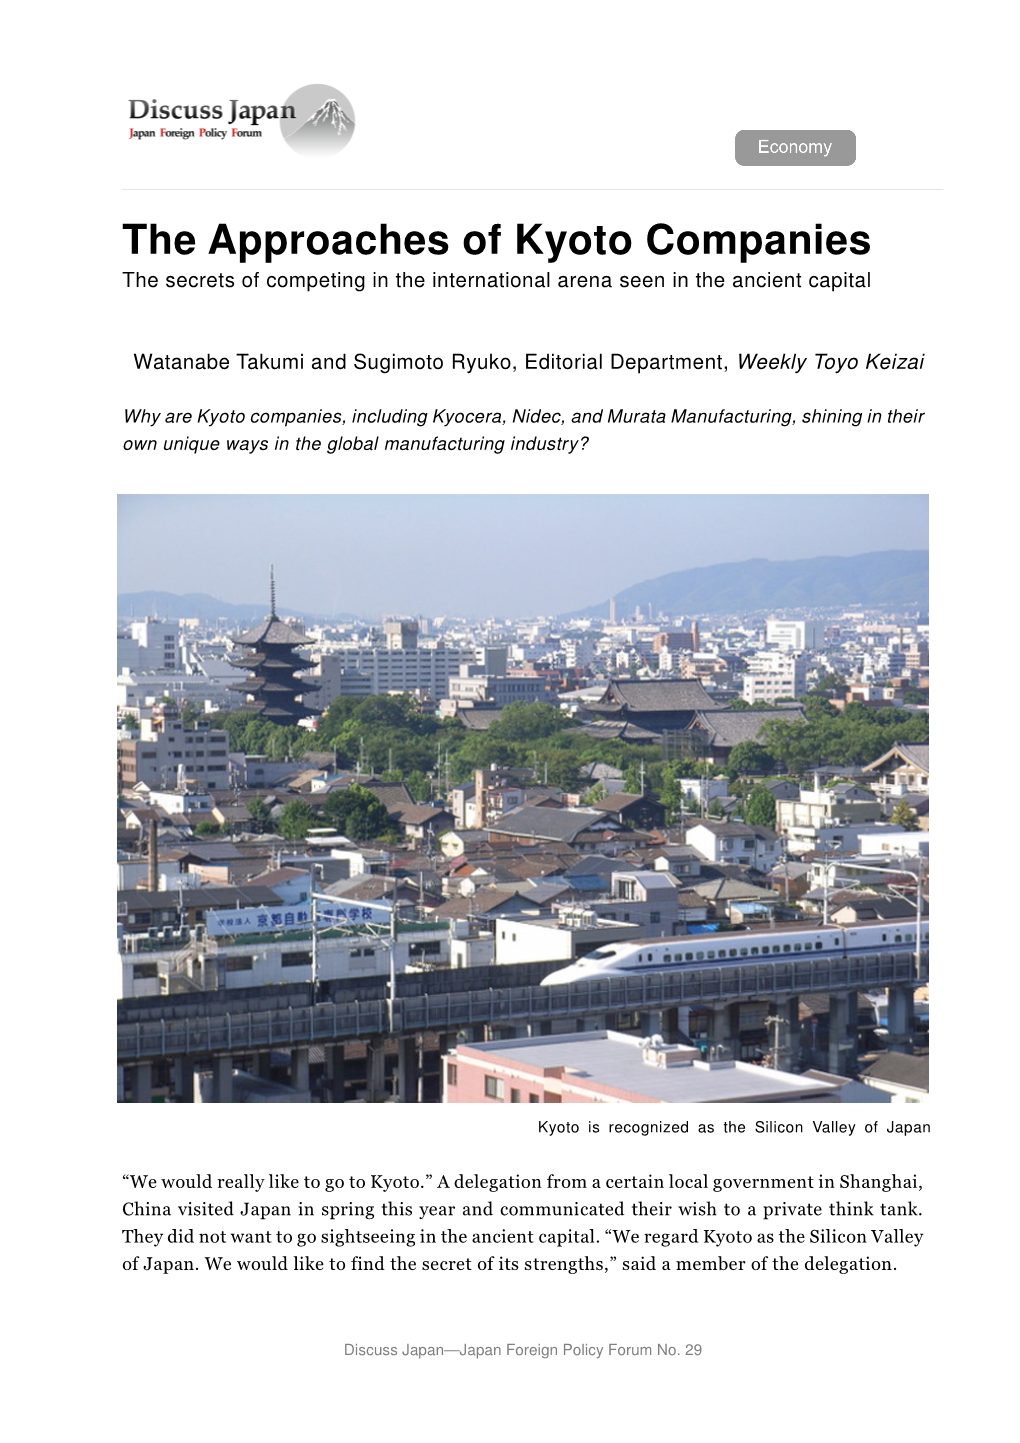 The Approaches of Kyoto Companies the Secrets of Competing in the International Arena Seen in the Ancient Capital